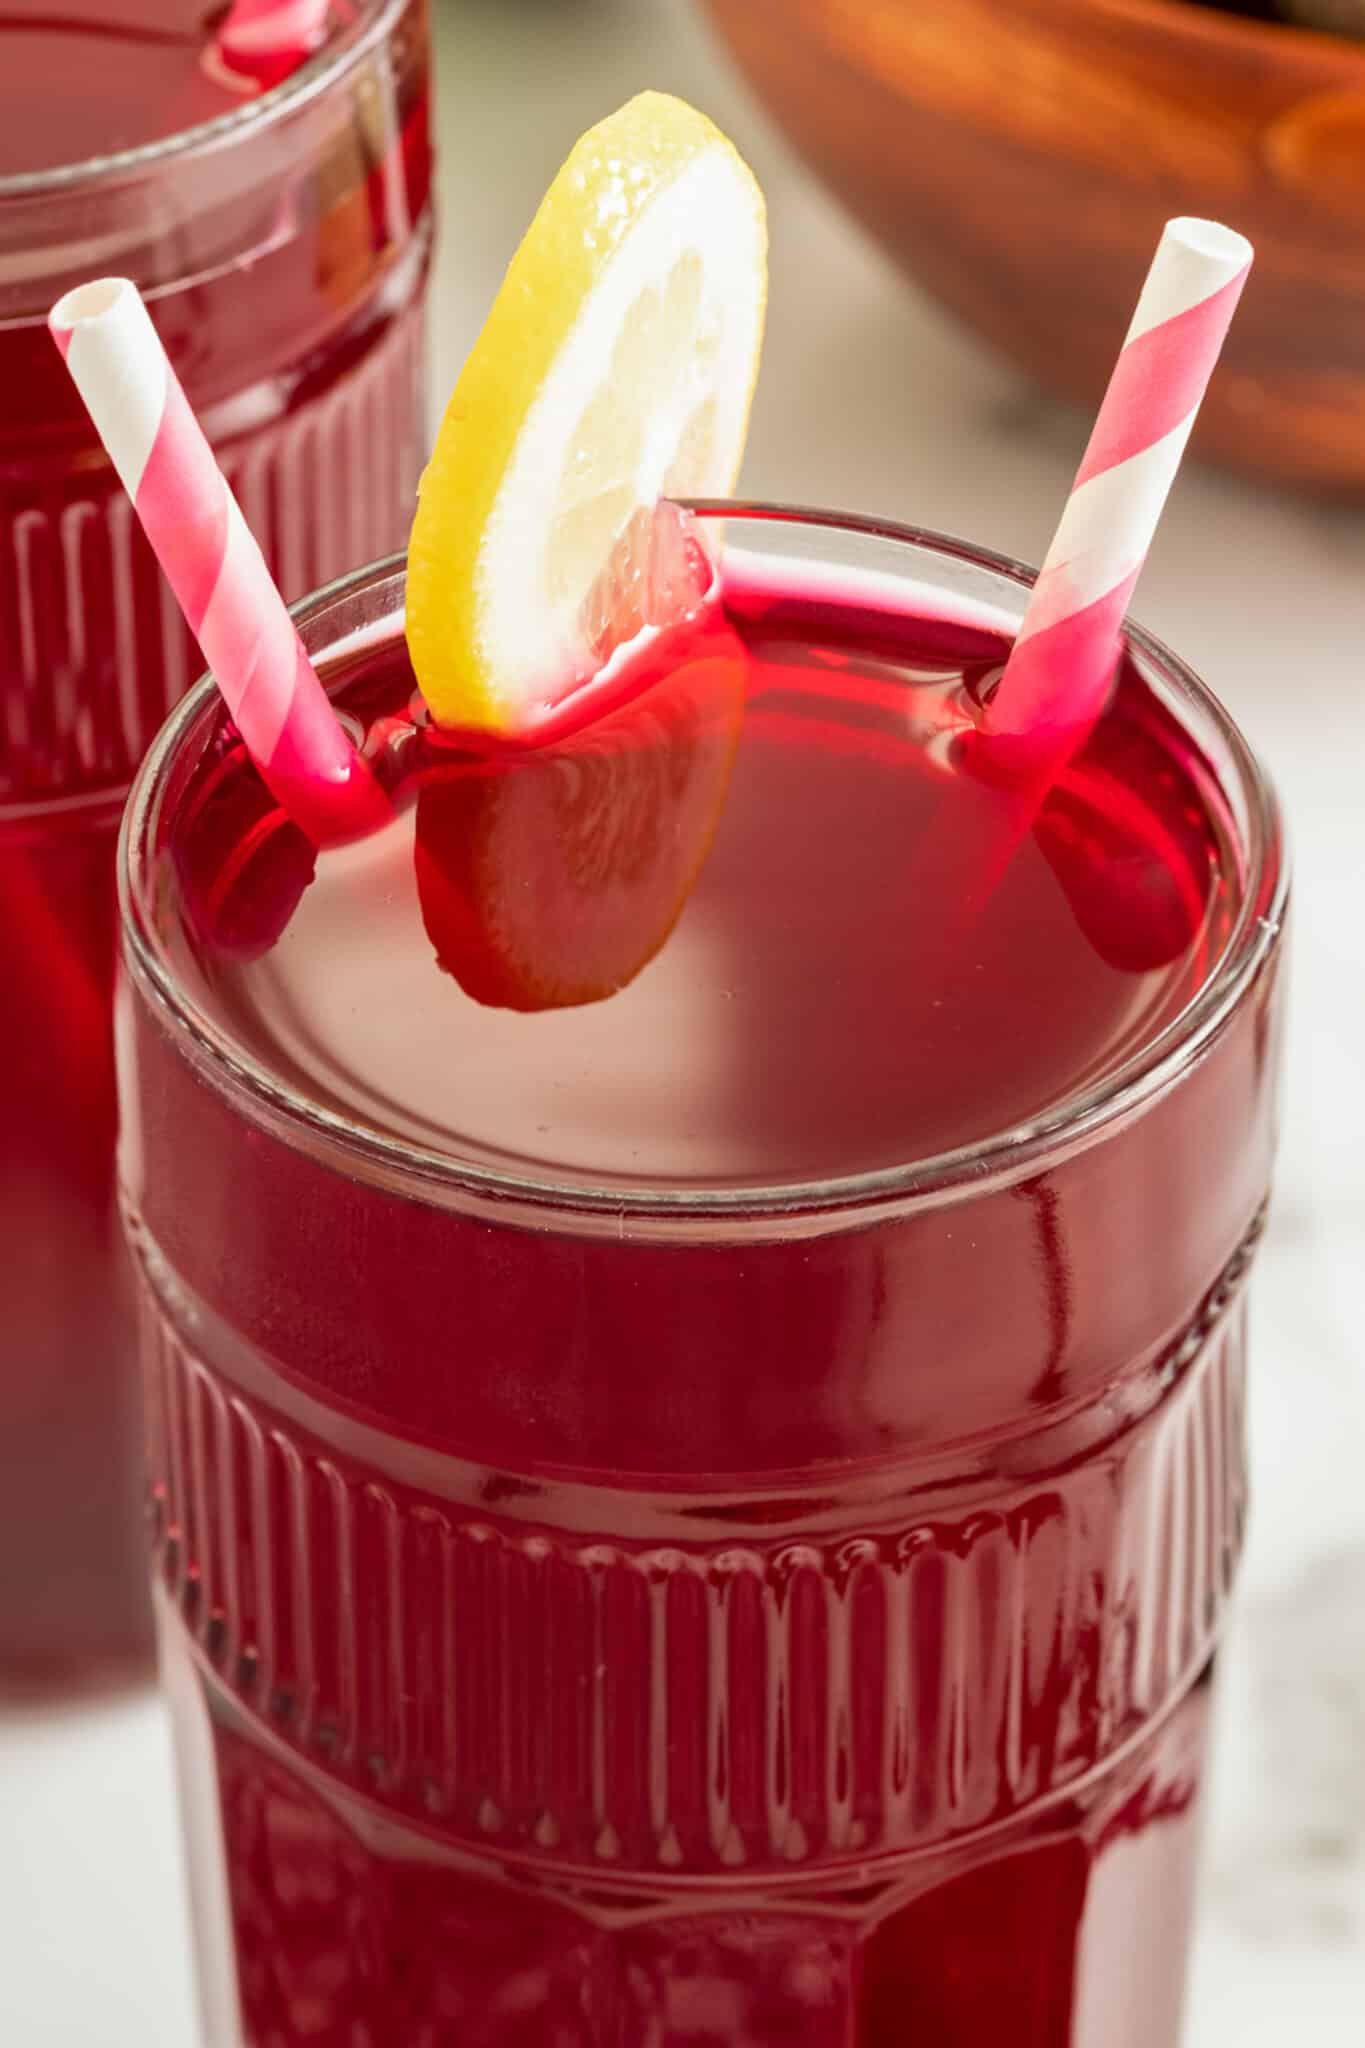 beet juice served in glass with slice of lemon and two striped straws.